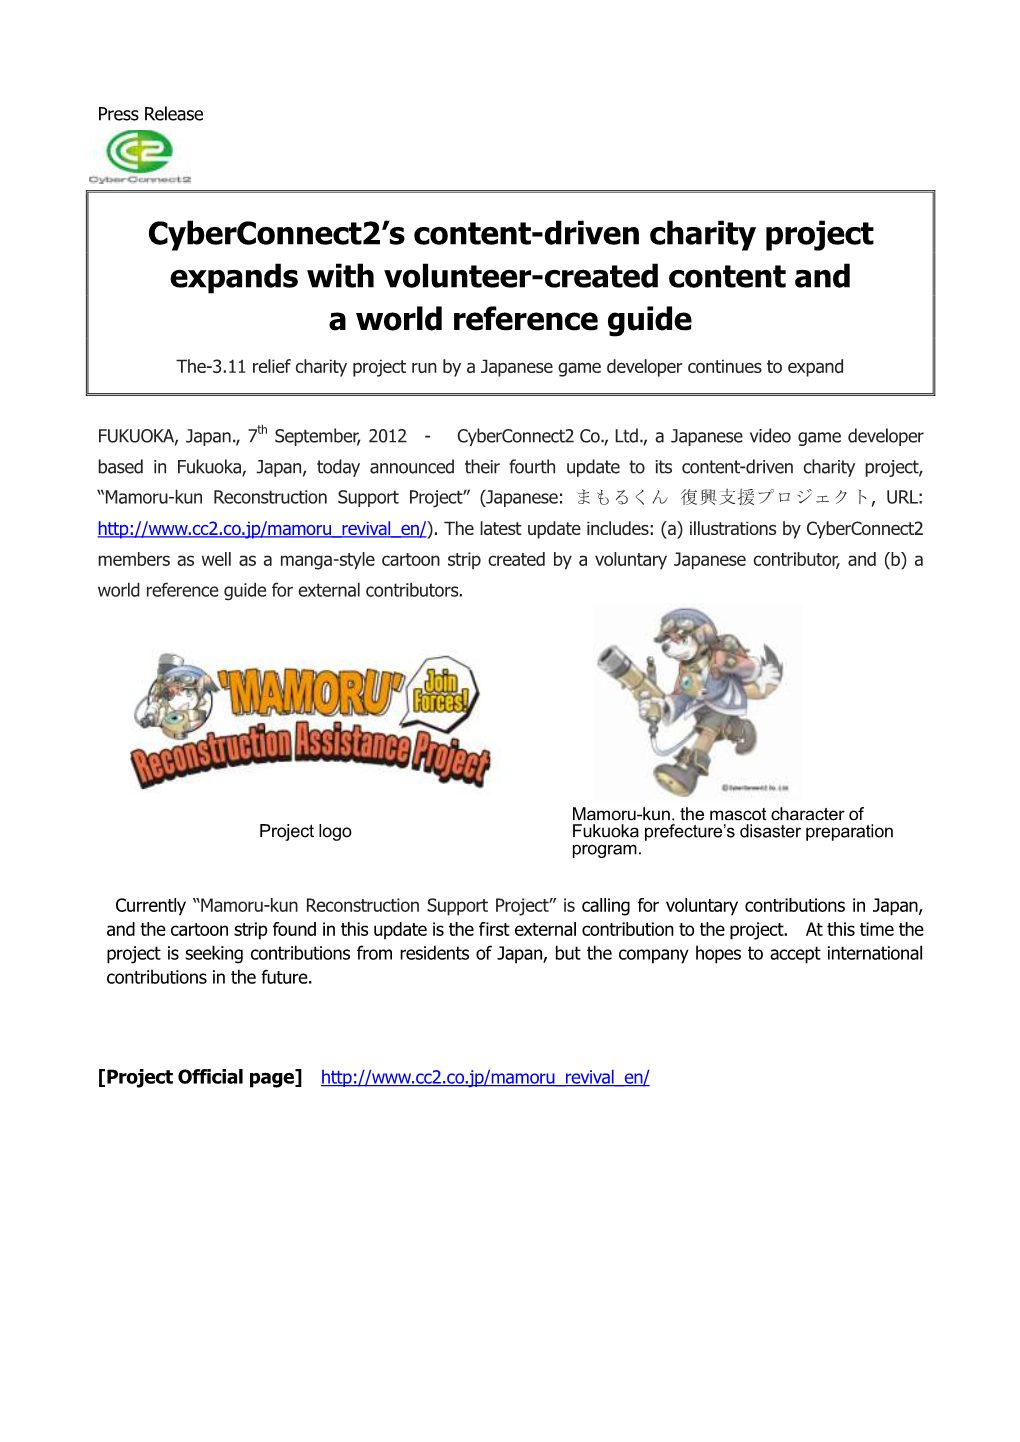 Cyberconnect2's Content-Driven Charity Project Expands With